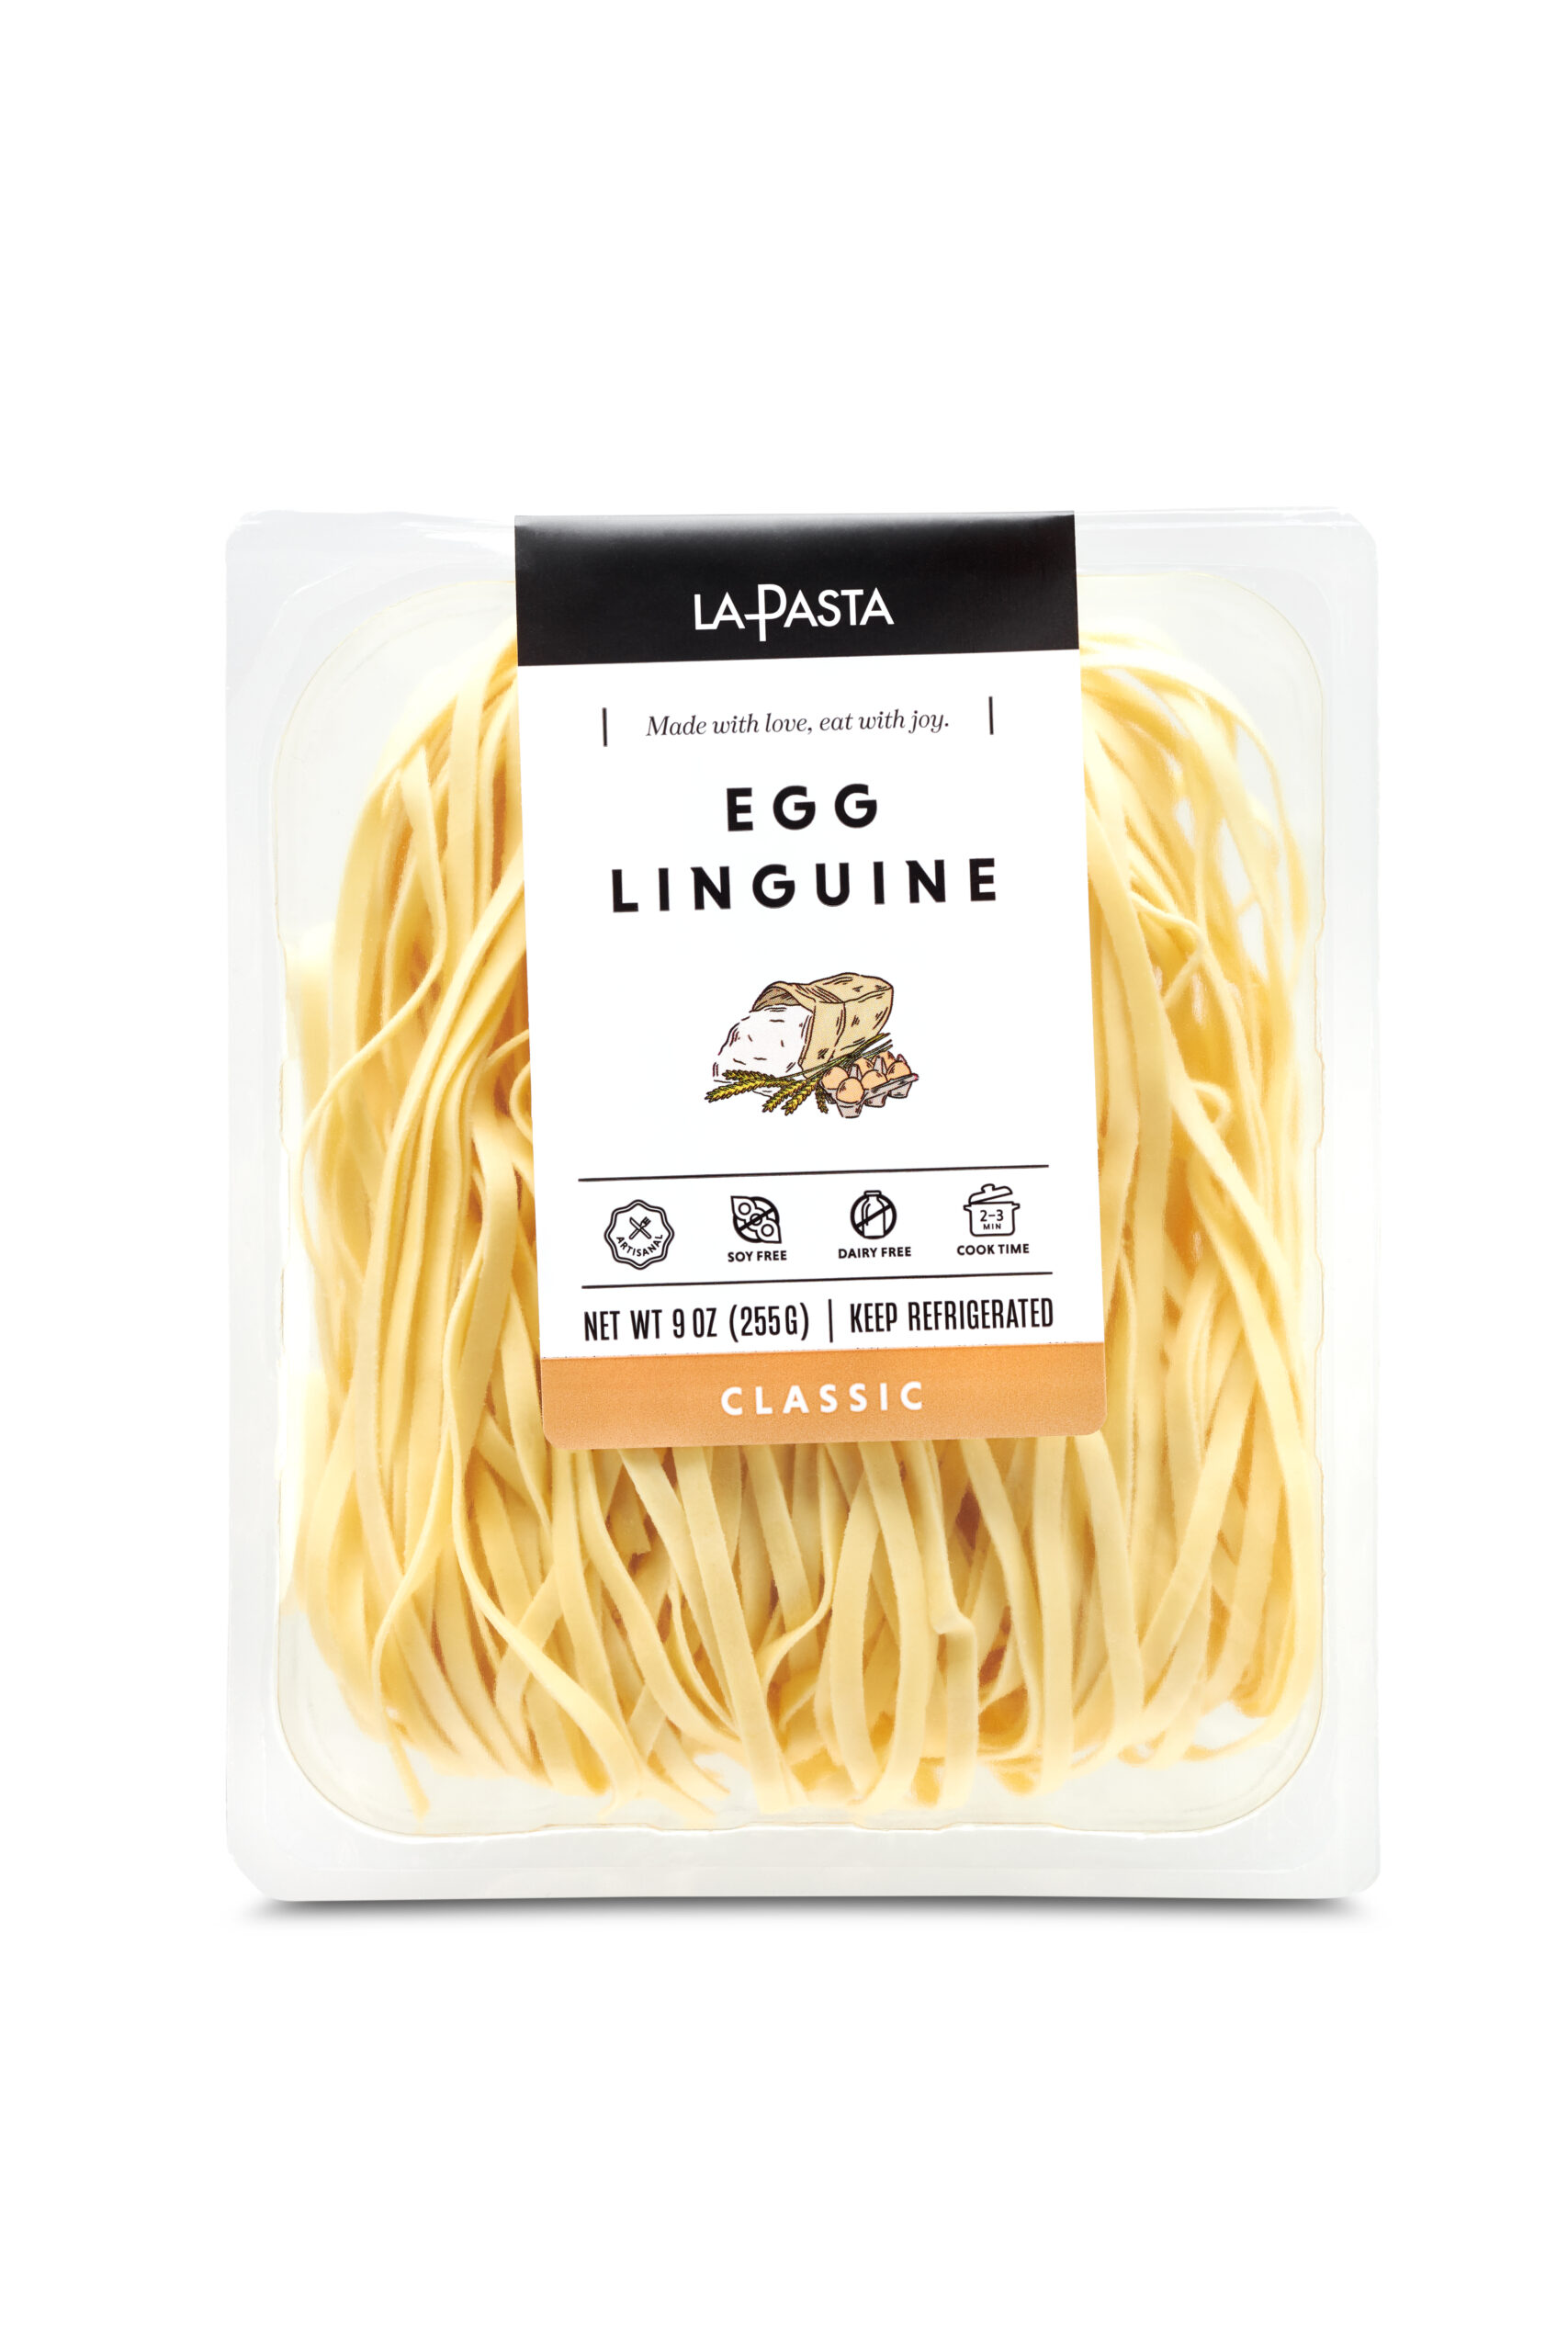 A package of egg linguine pasta.